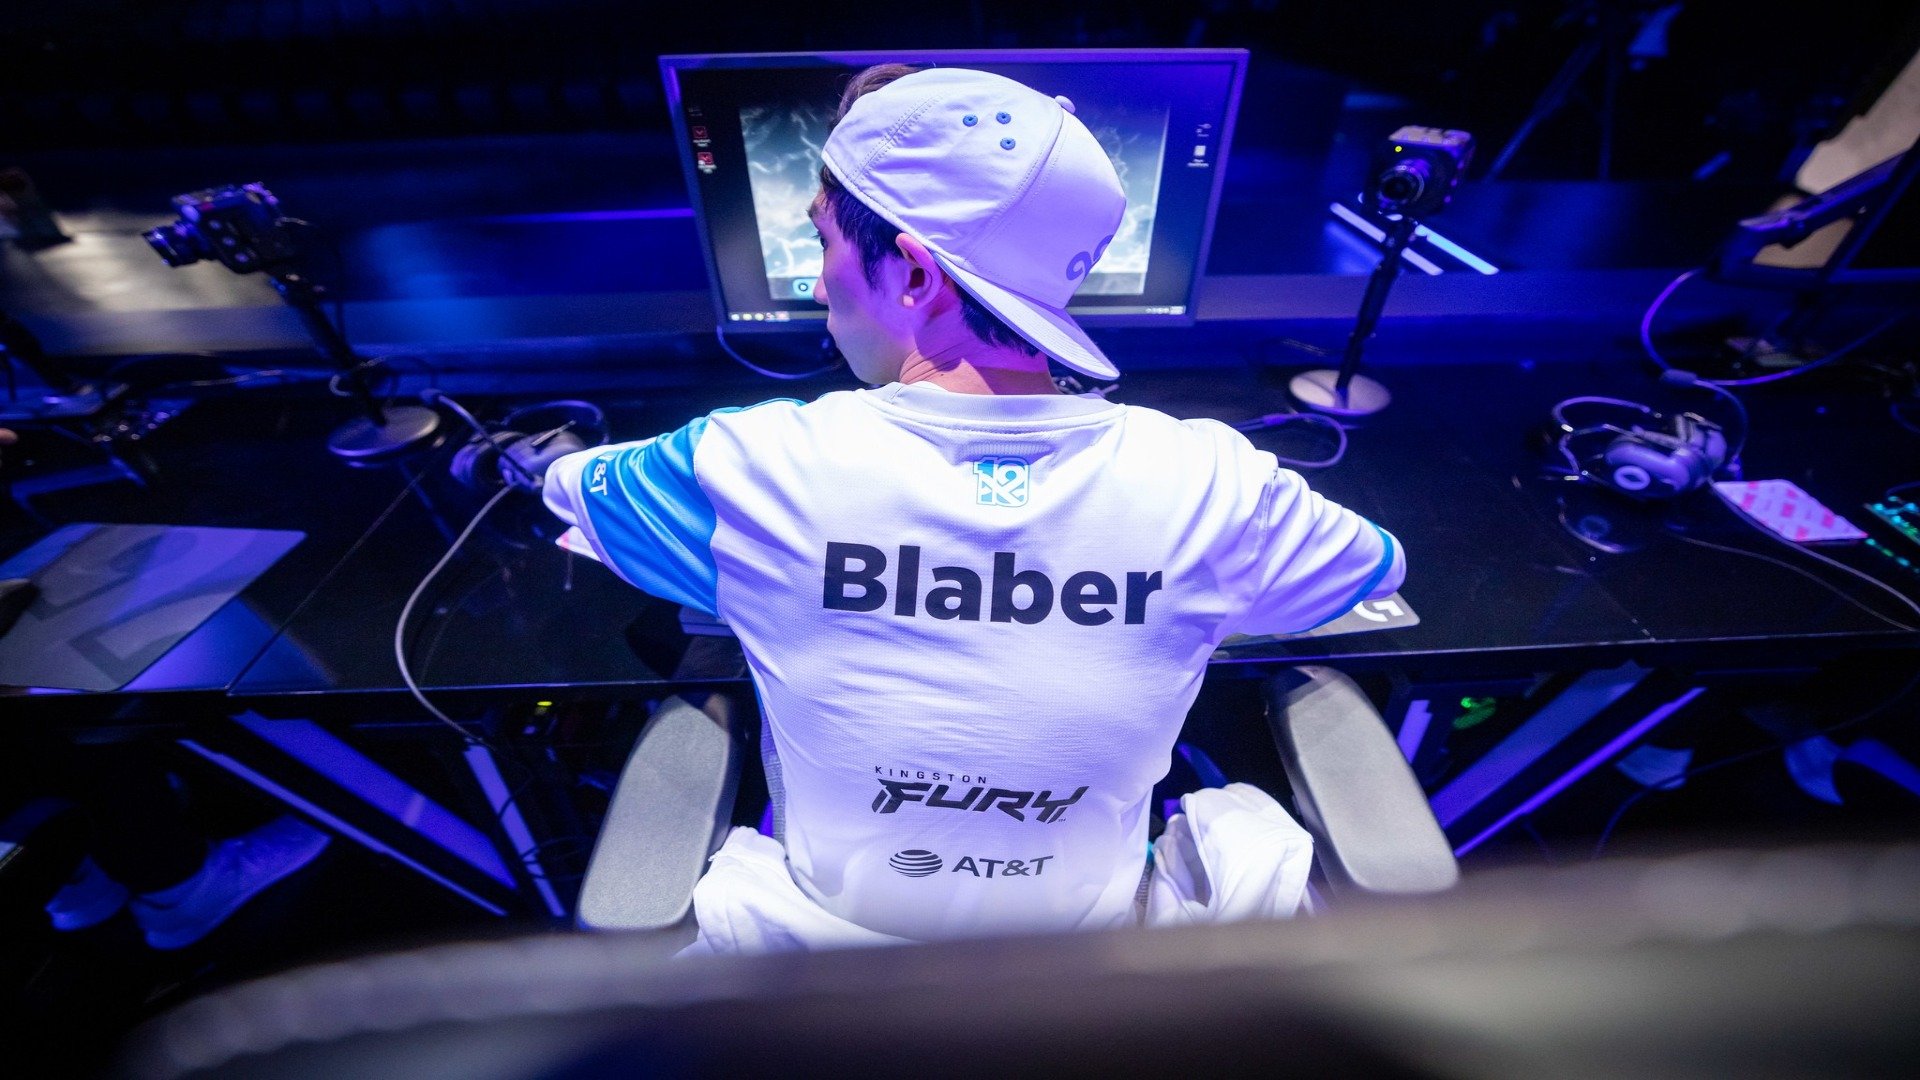 Cloud9 Blaber on-stage before a game